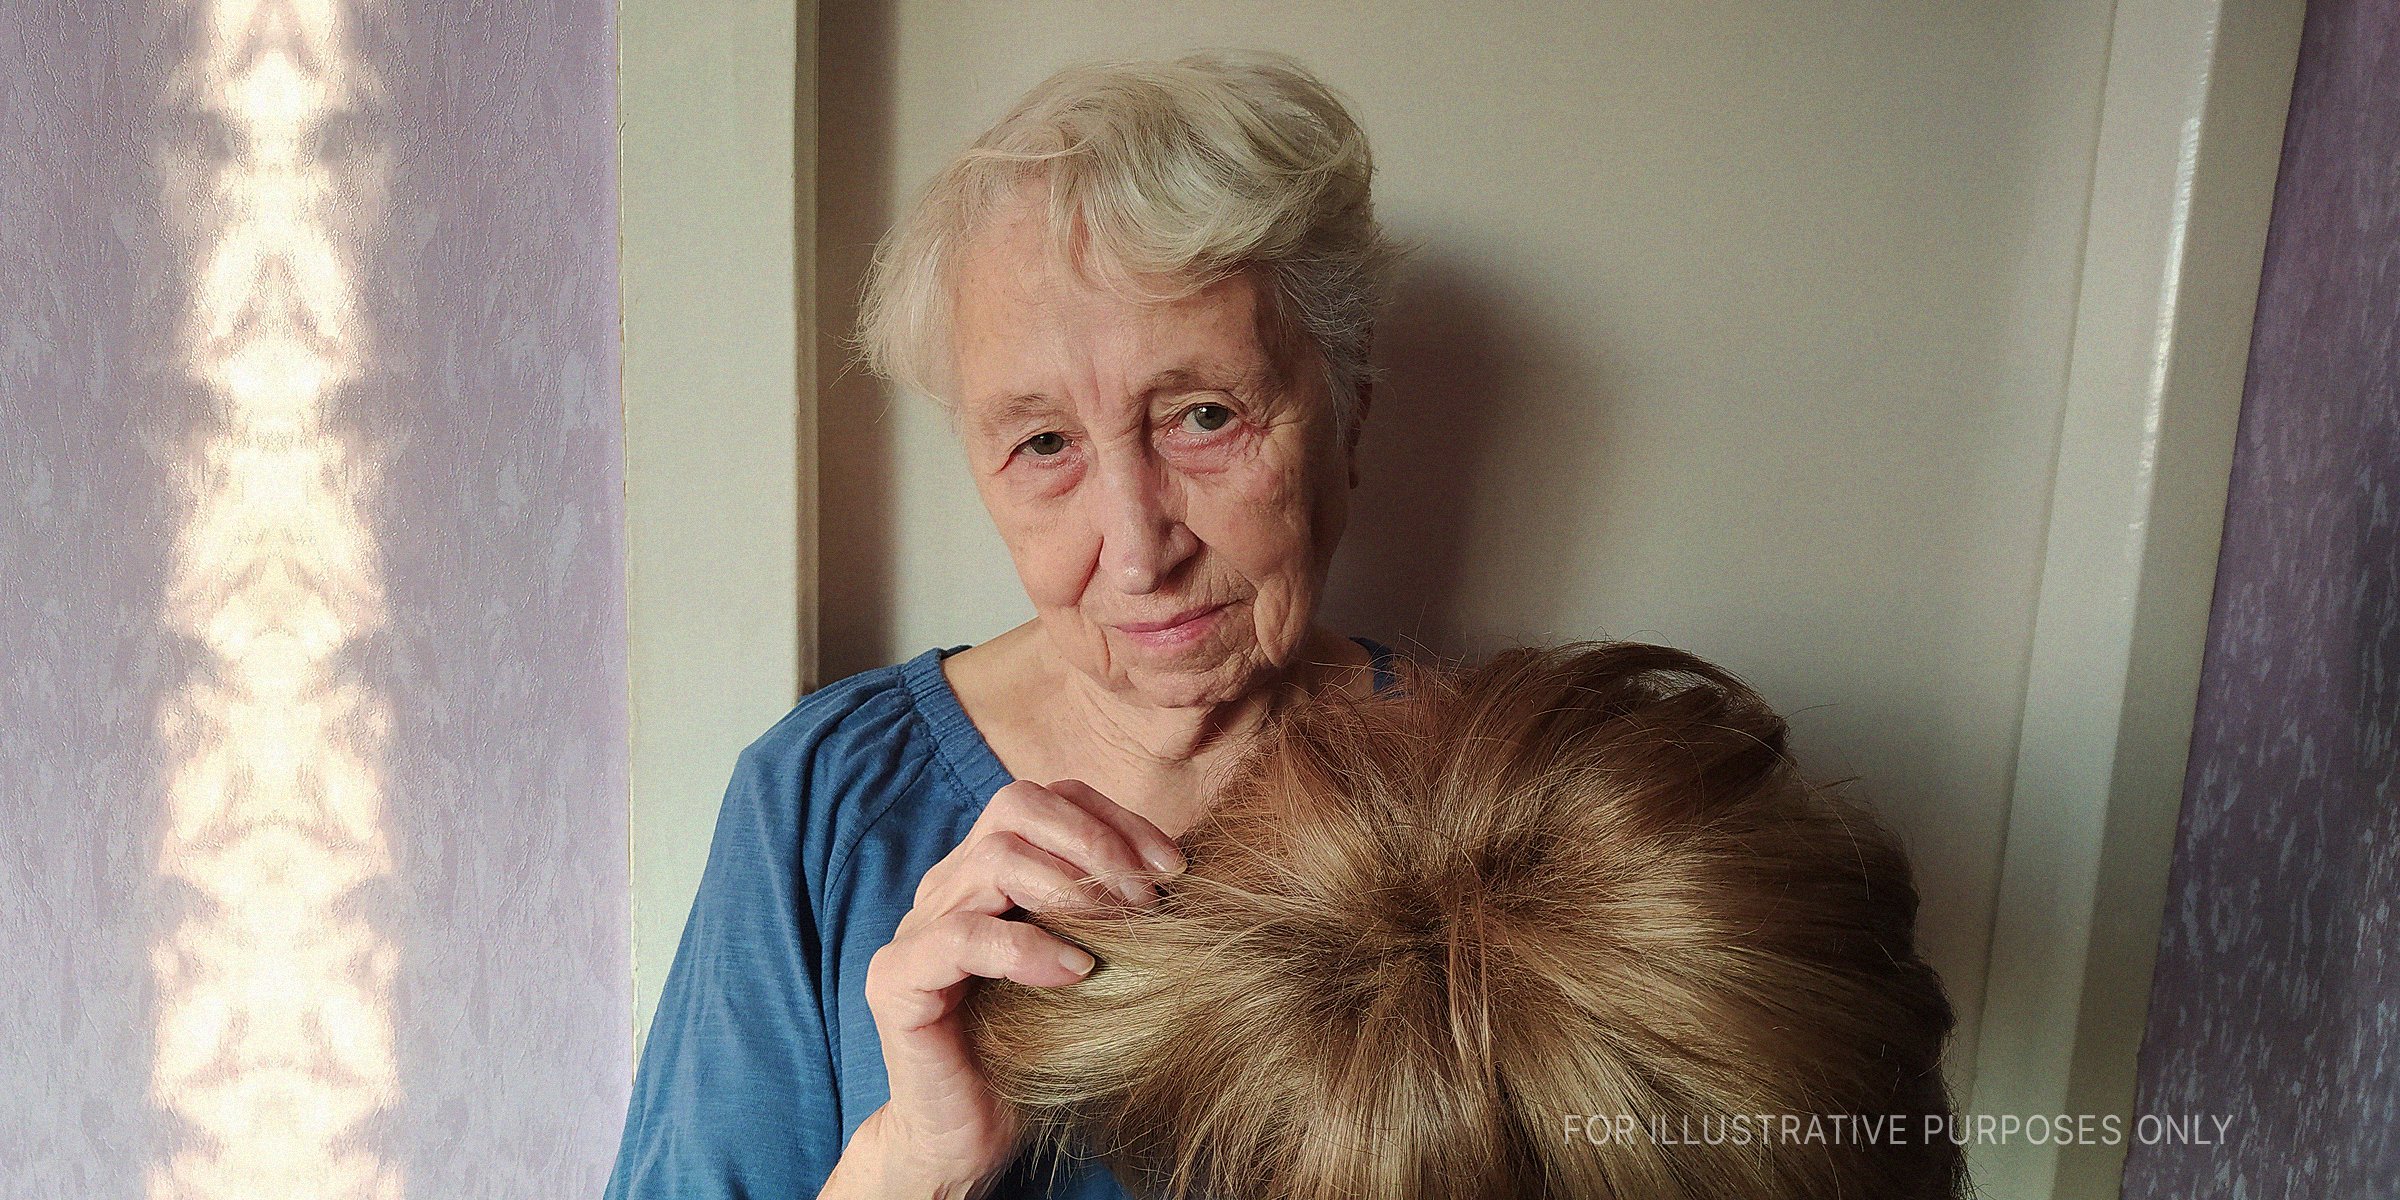 Old Woman Showing Her Wig. | Source: Shutterstock